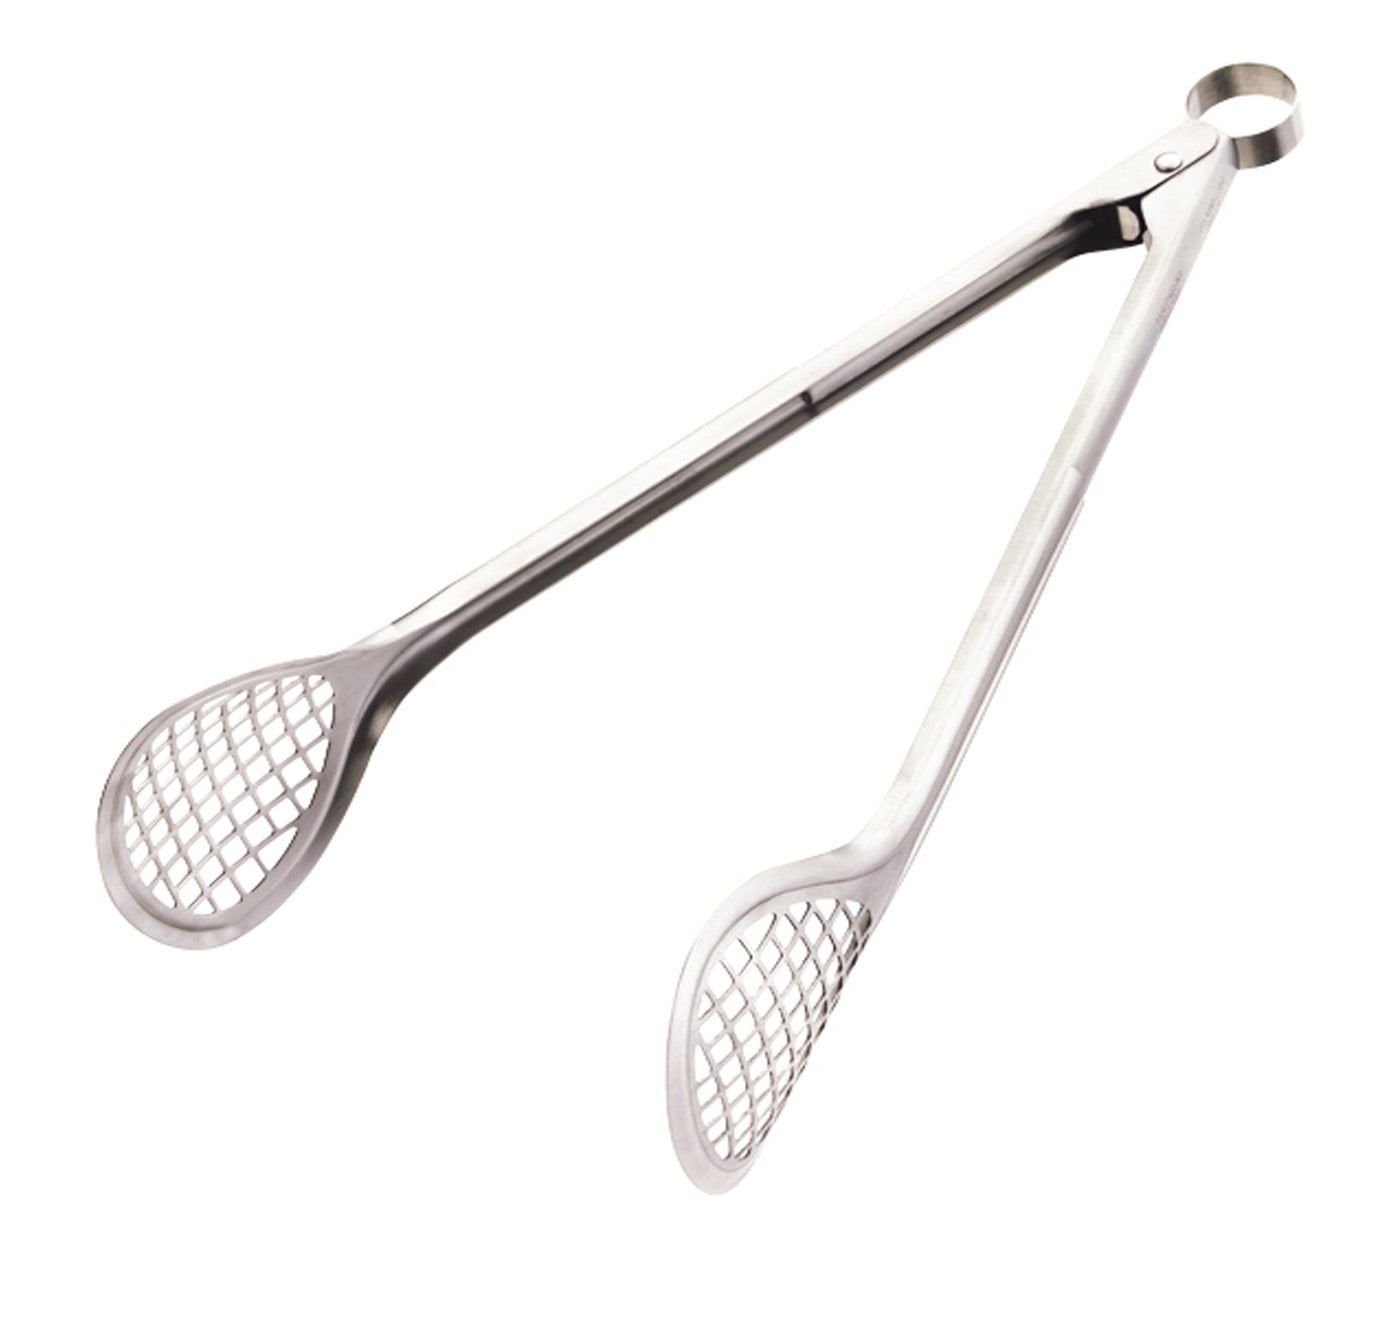 Grillpro 40240 16" Stainless Steel Turner Tongs 